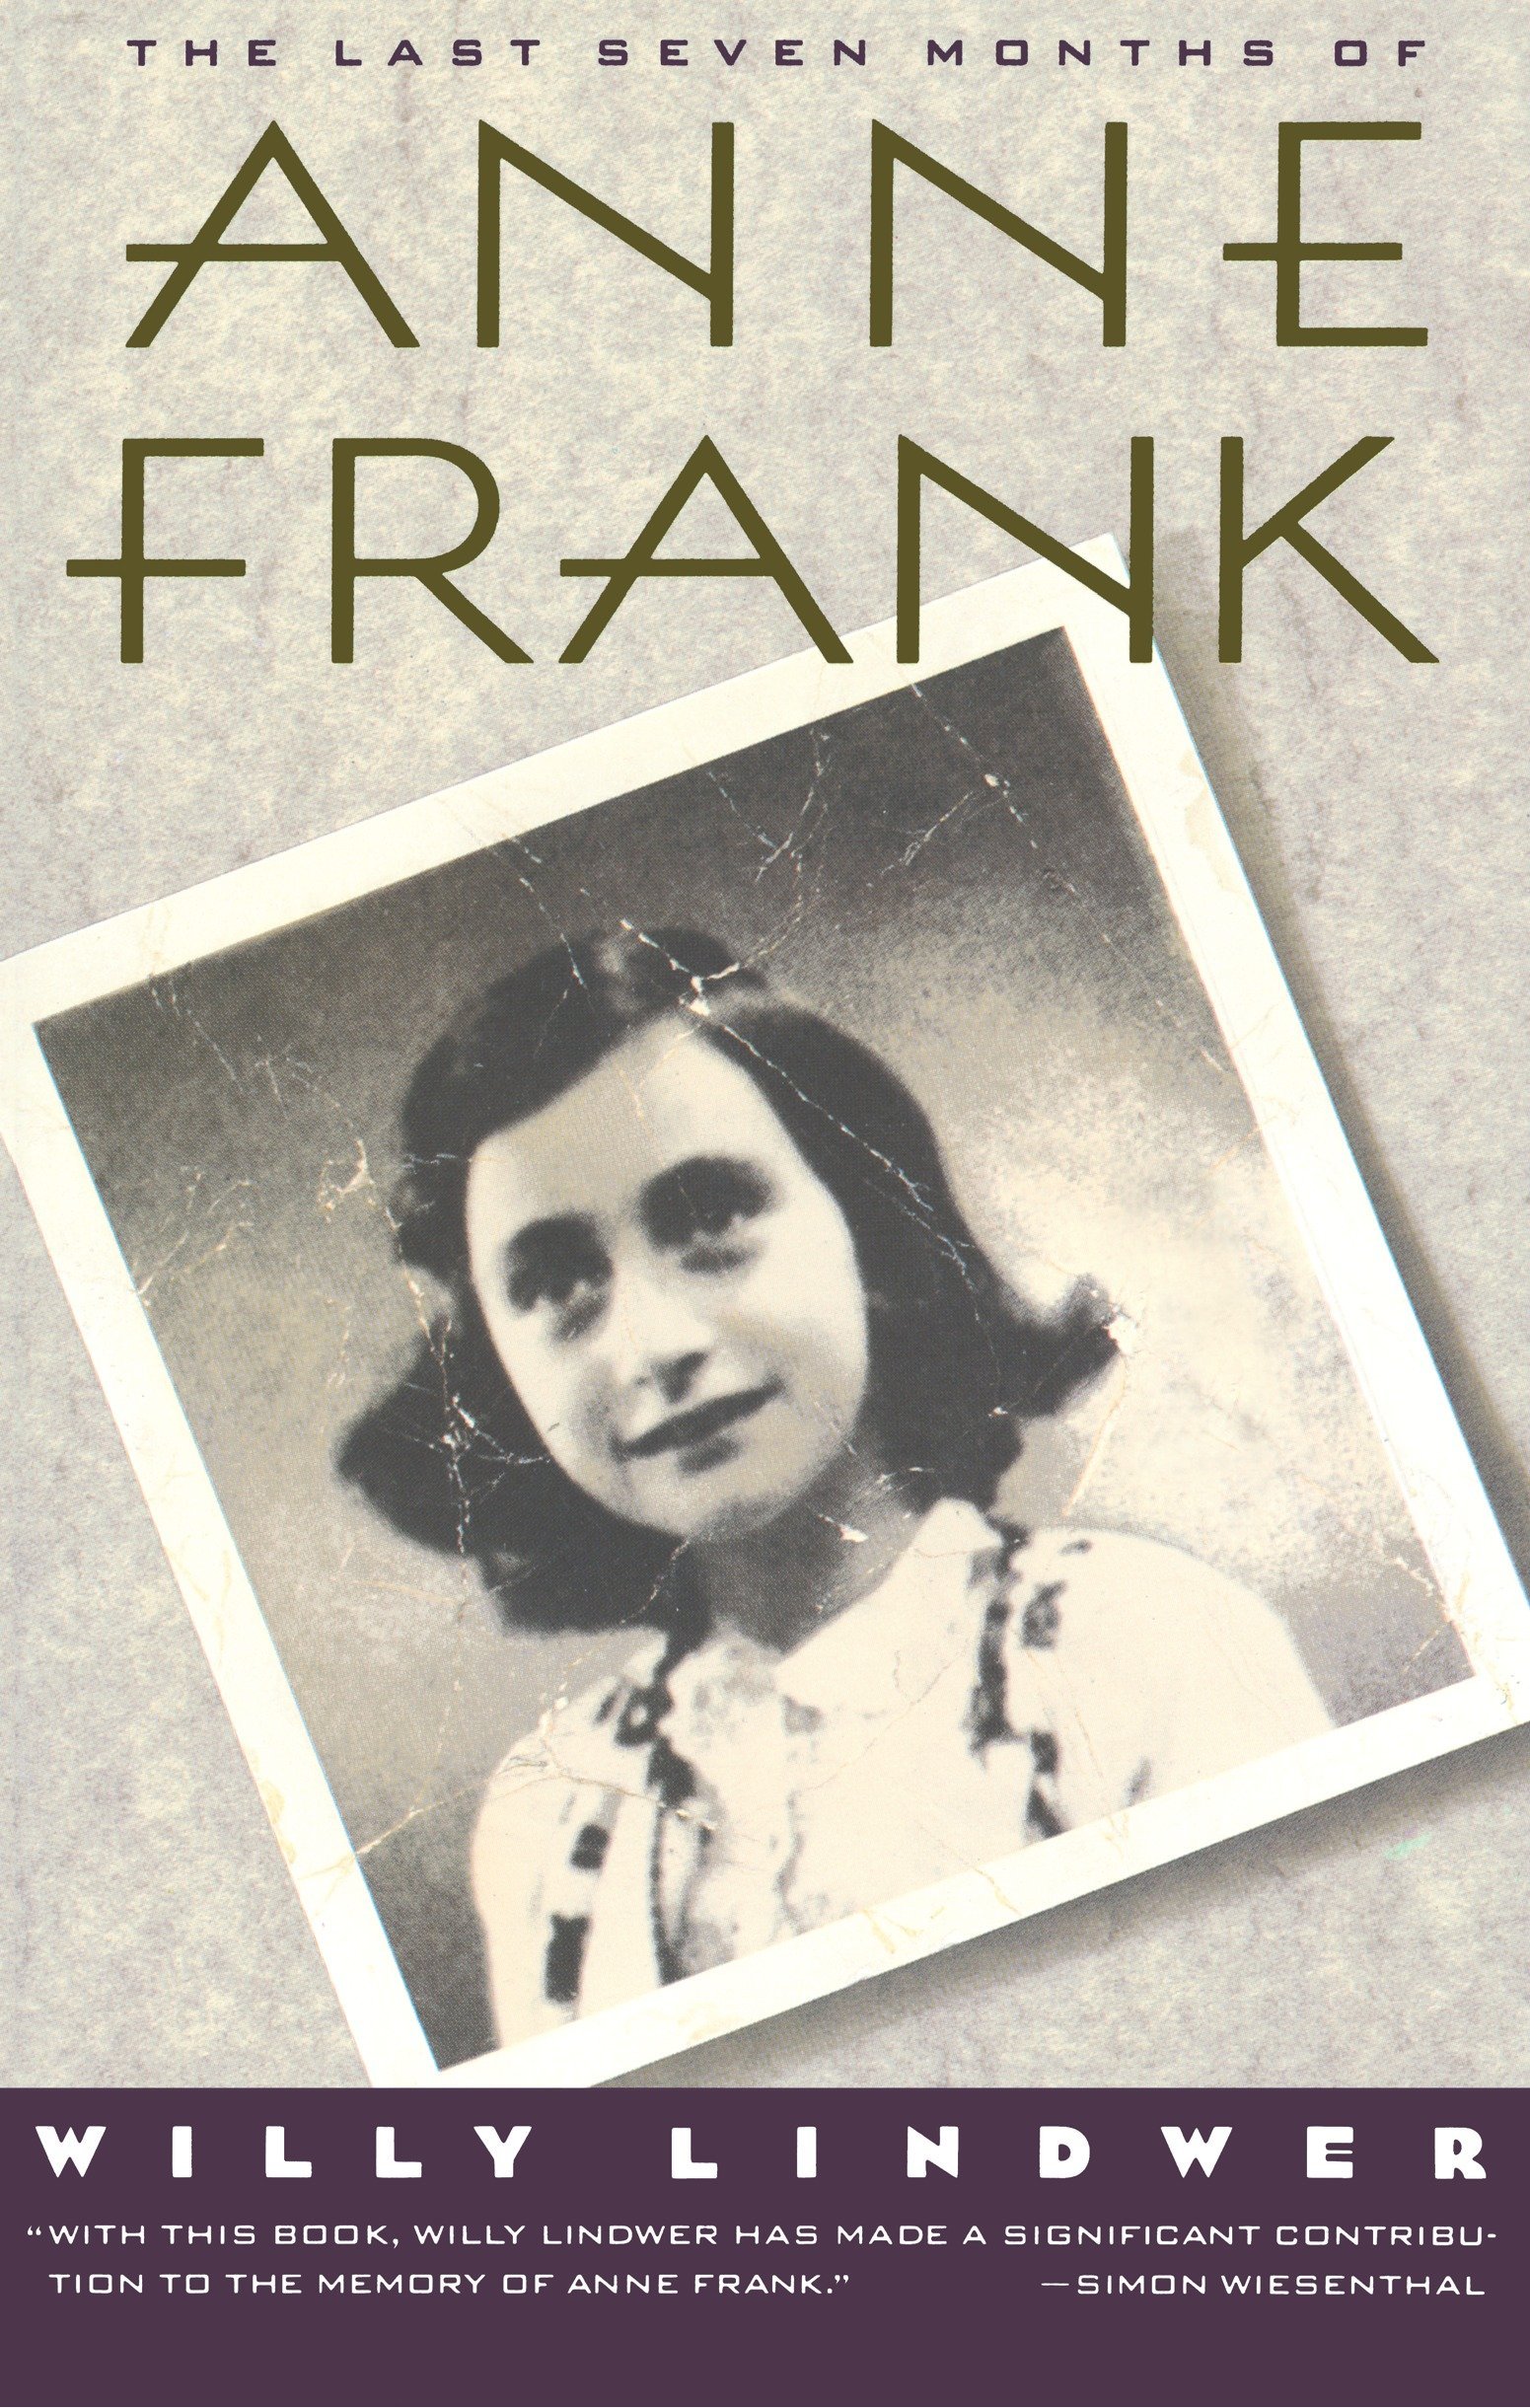 The Last Seven Months Of Anne Frank - The Stories of Six Women Who Knew Anne Frank